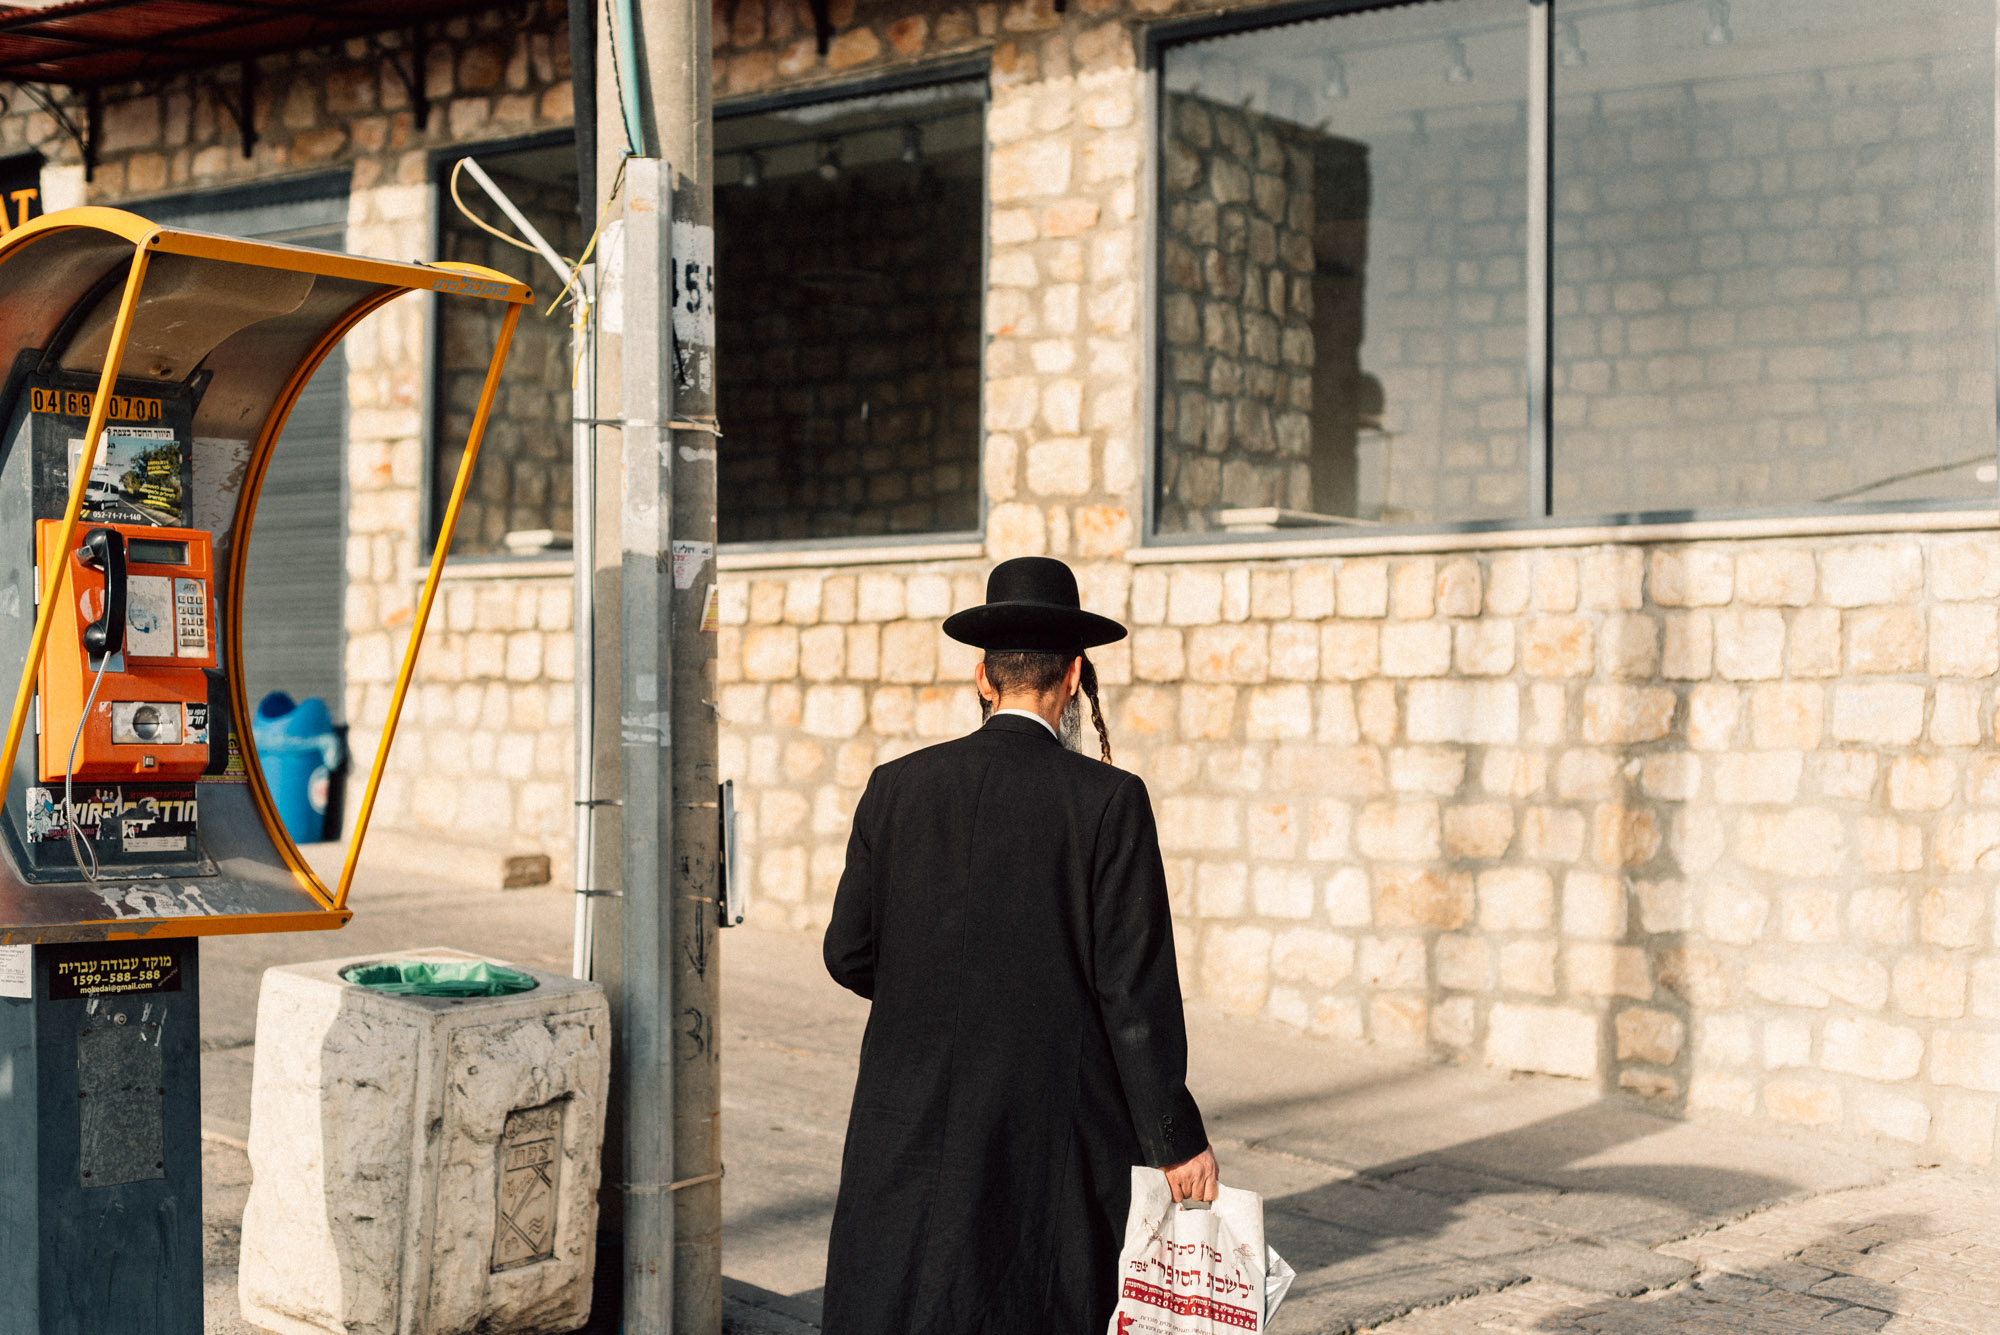 Israël: 5 highlights pour t'en mettre plein la vue — Voyage — Jeff On The Road — All photos are under Copyright  © 2019 Jeff Frenette Photography / dezjeff. To use the photos, please contact me at dezjeff@me.com.